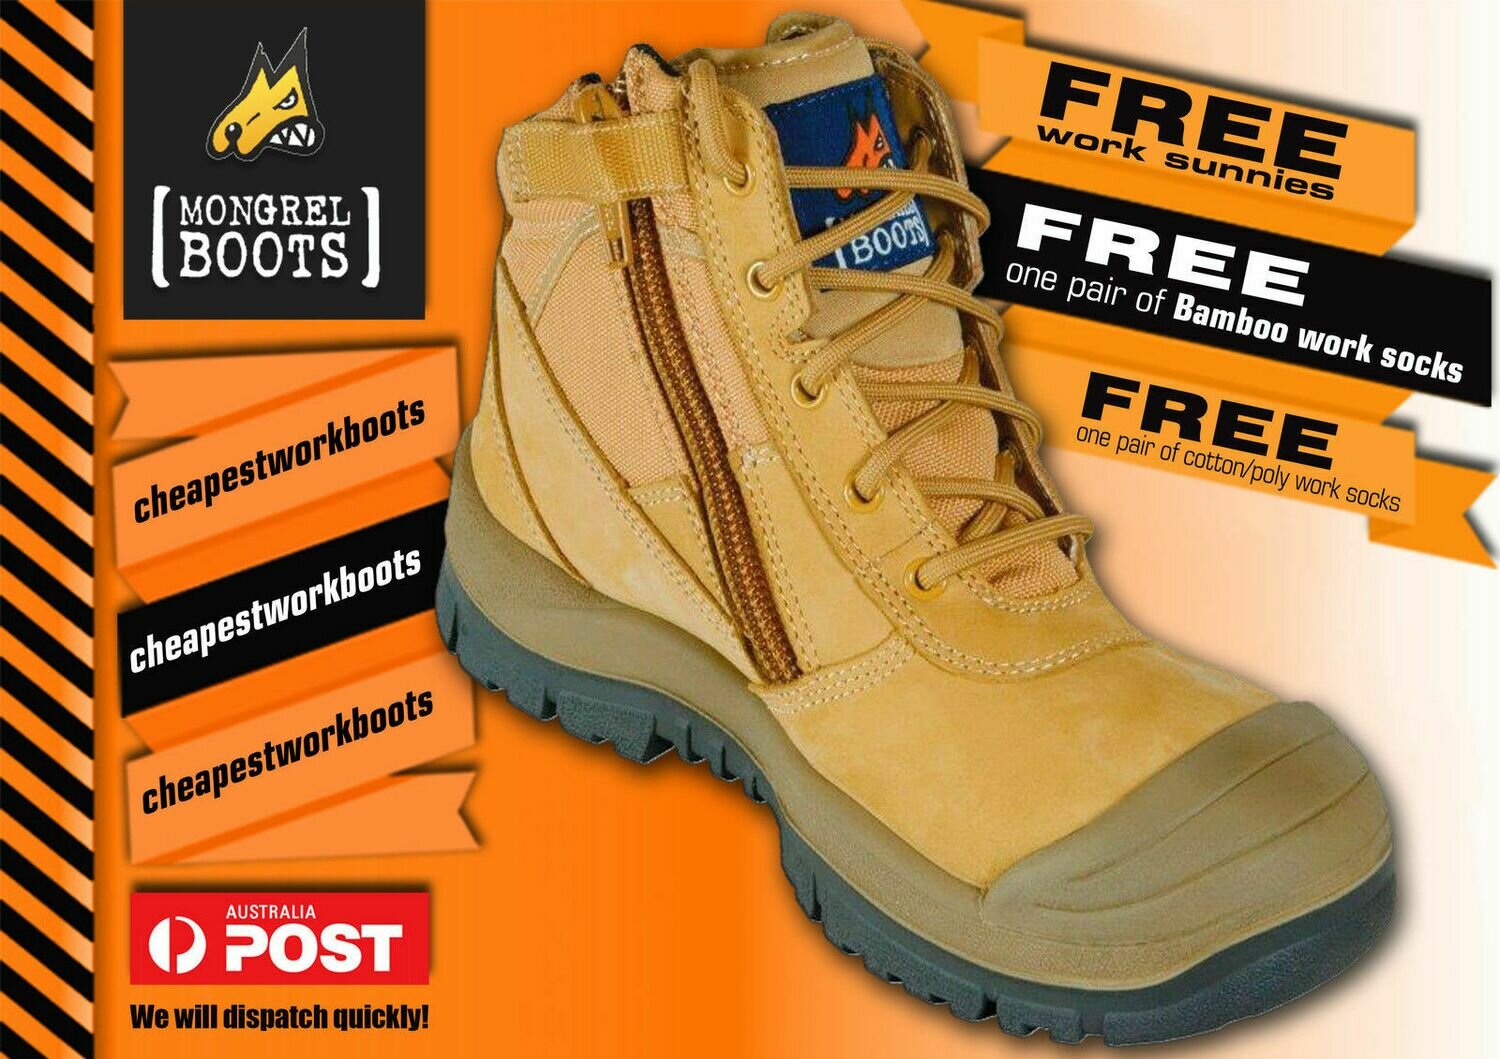 Mongrel 461050 Work Boots 3 FREE GIFTS Steel Toe Safety Wheat, Zip Scuff Cap